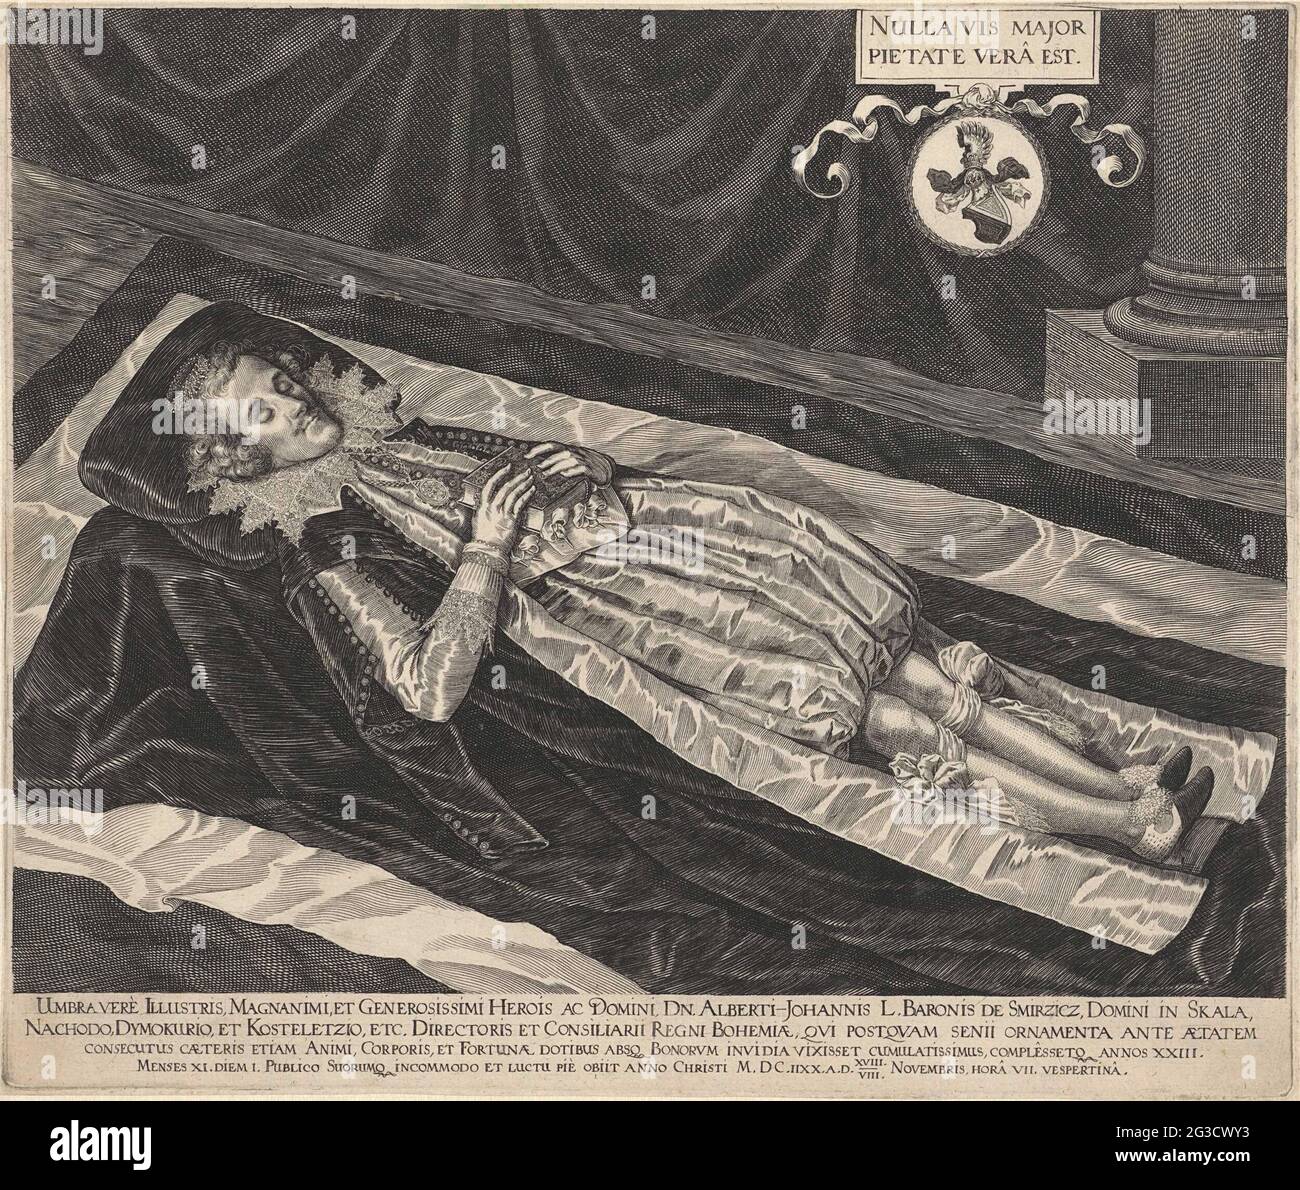 Portrait of Albert-Johannes, Baron of Smirzicz on his death bed. Baron  Albert-Johannes from Smirzicz is located in full length on his death bed,  in fashionable clothing. At the top of the corner